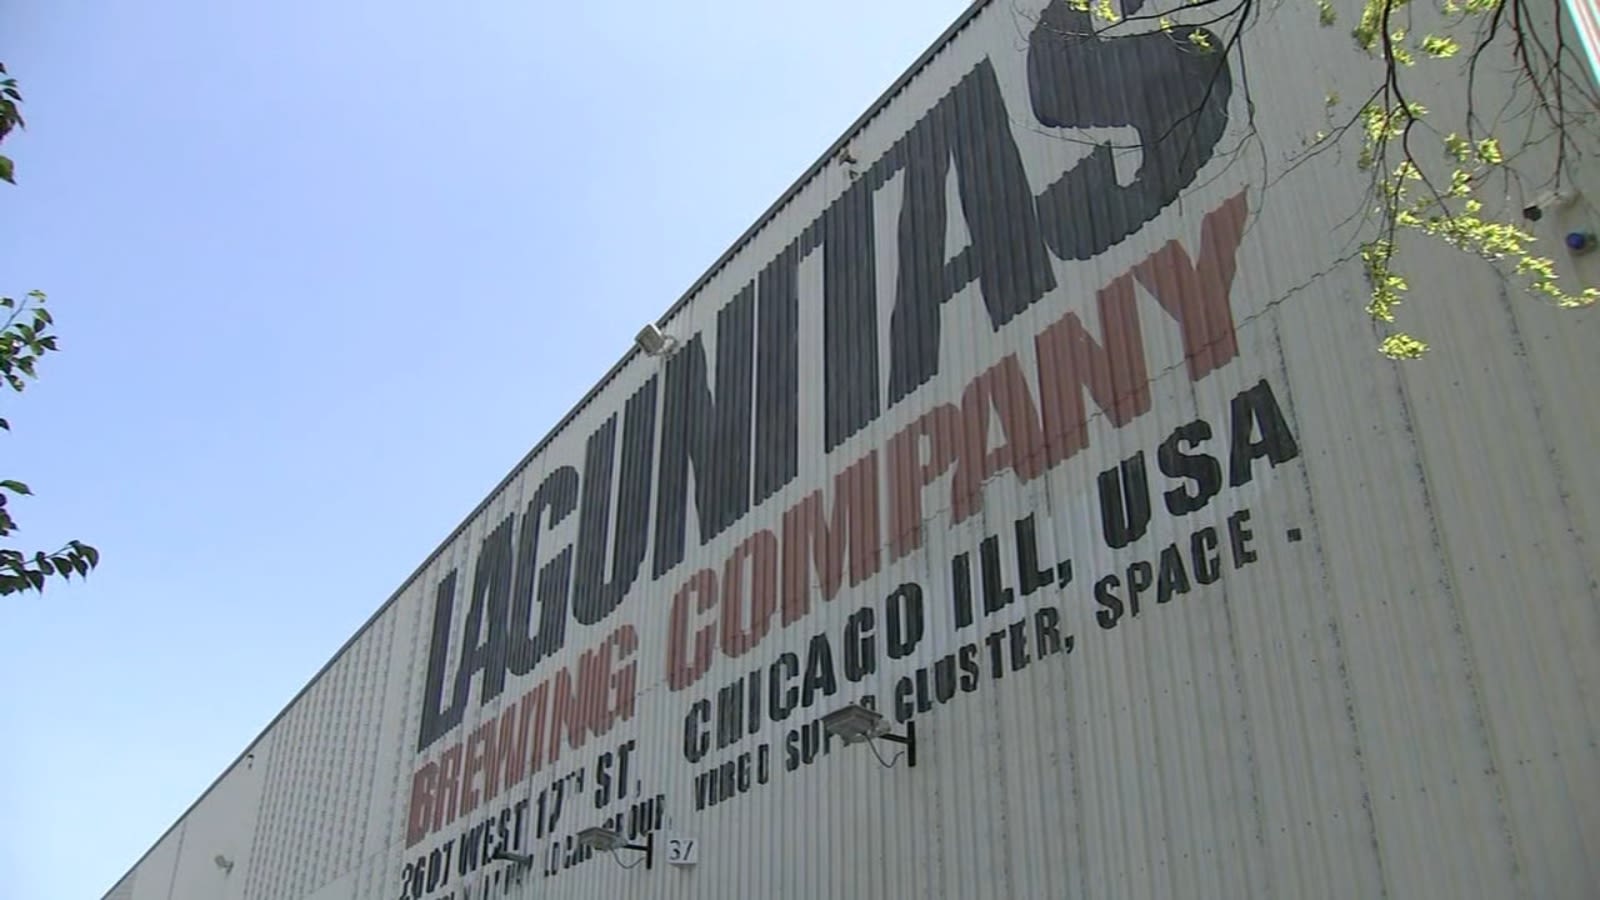 Lagunitas' Chicago location moving brewing operations to California this summer